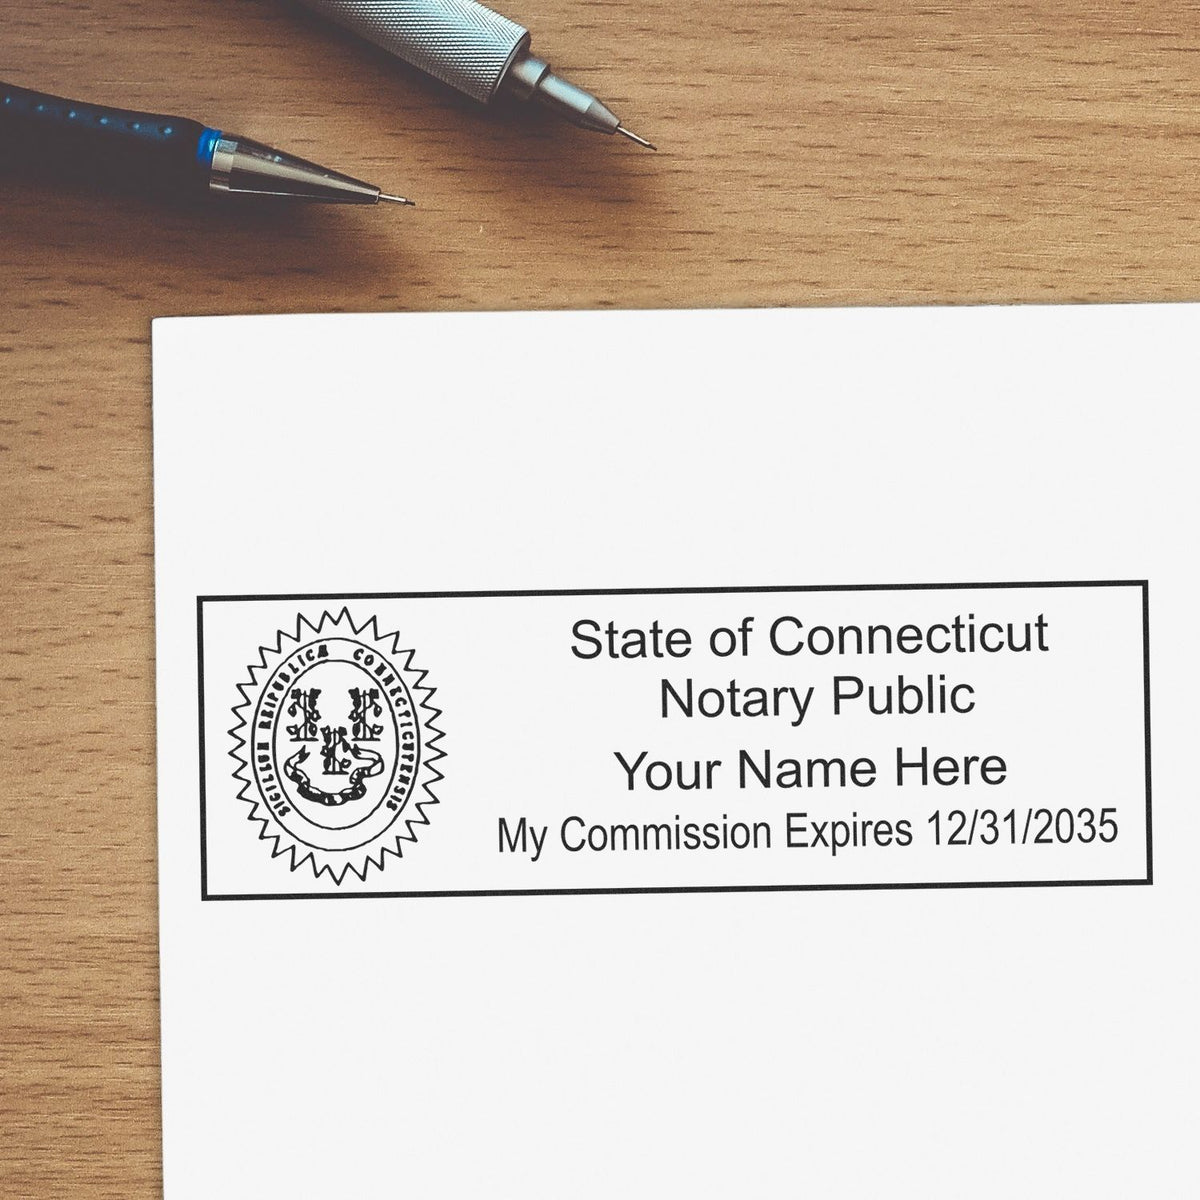 This paper is stamped with a sample imprint of the Super Slim Connecticut Notary Public Stamp, signifying its quality and reliability.